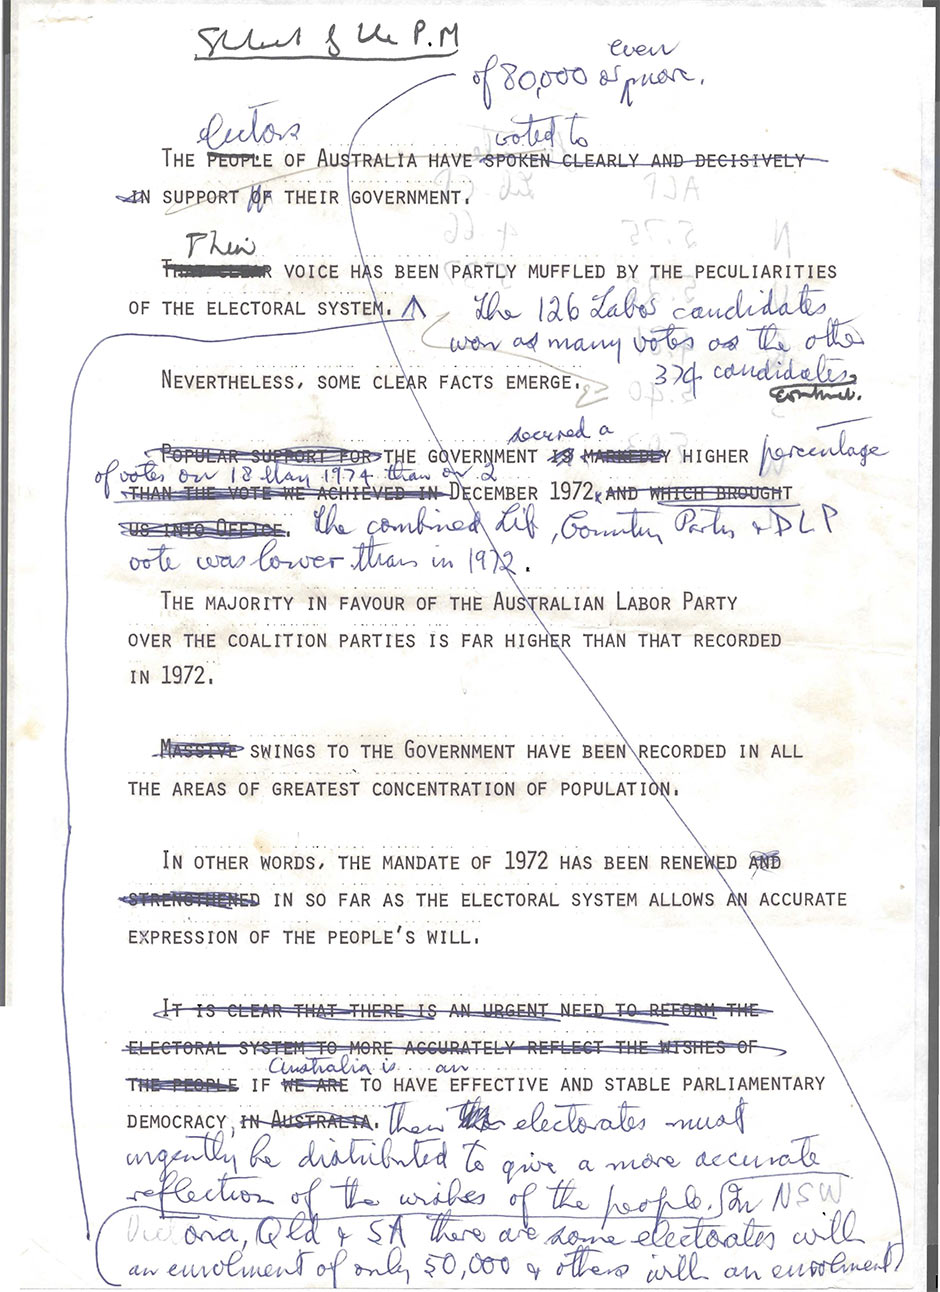 Gough Whitlam's handwritten notes cover a draft speech, which he delivered after the double dissolution election of May 1974.